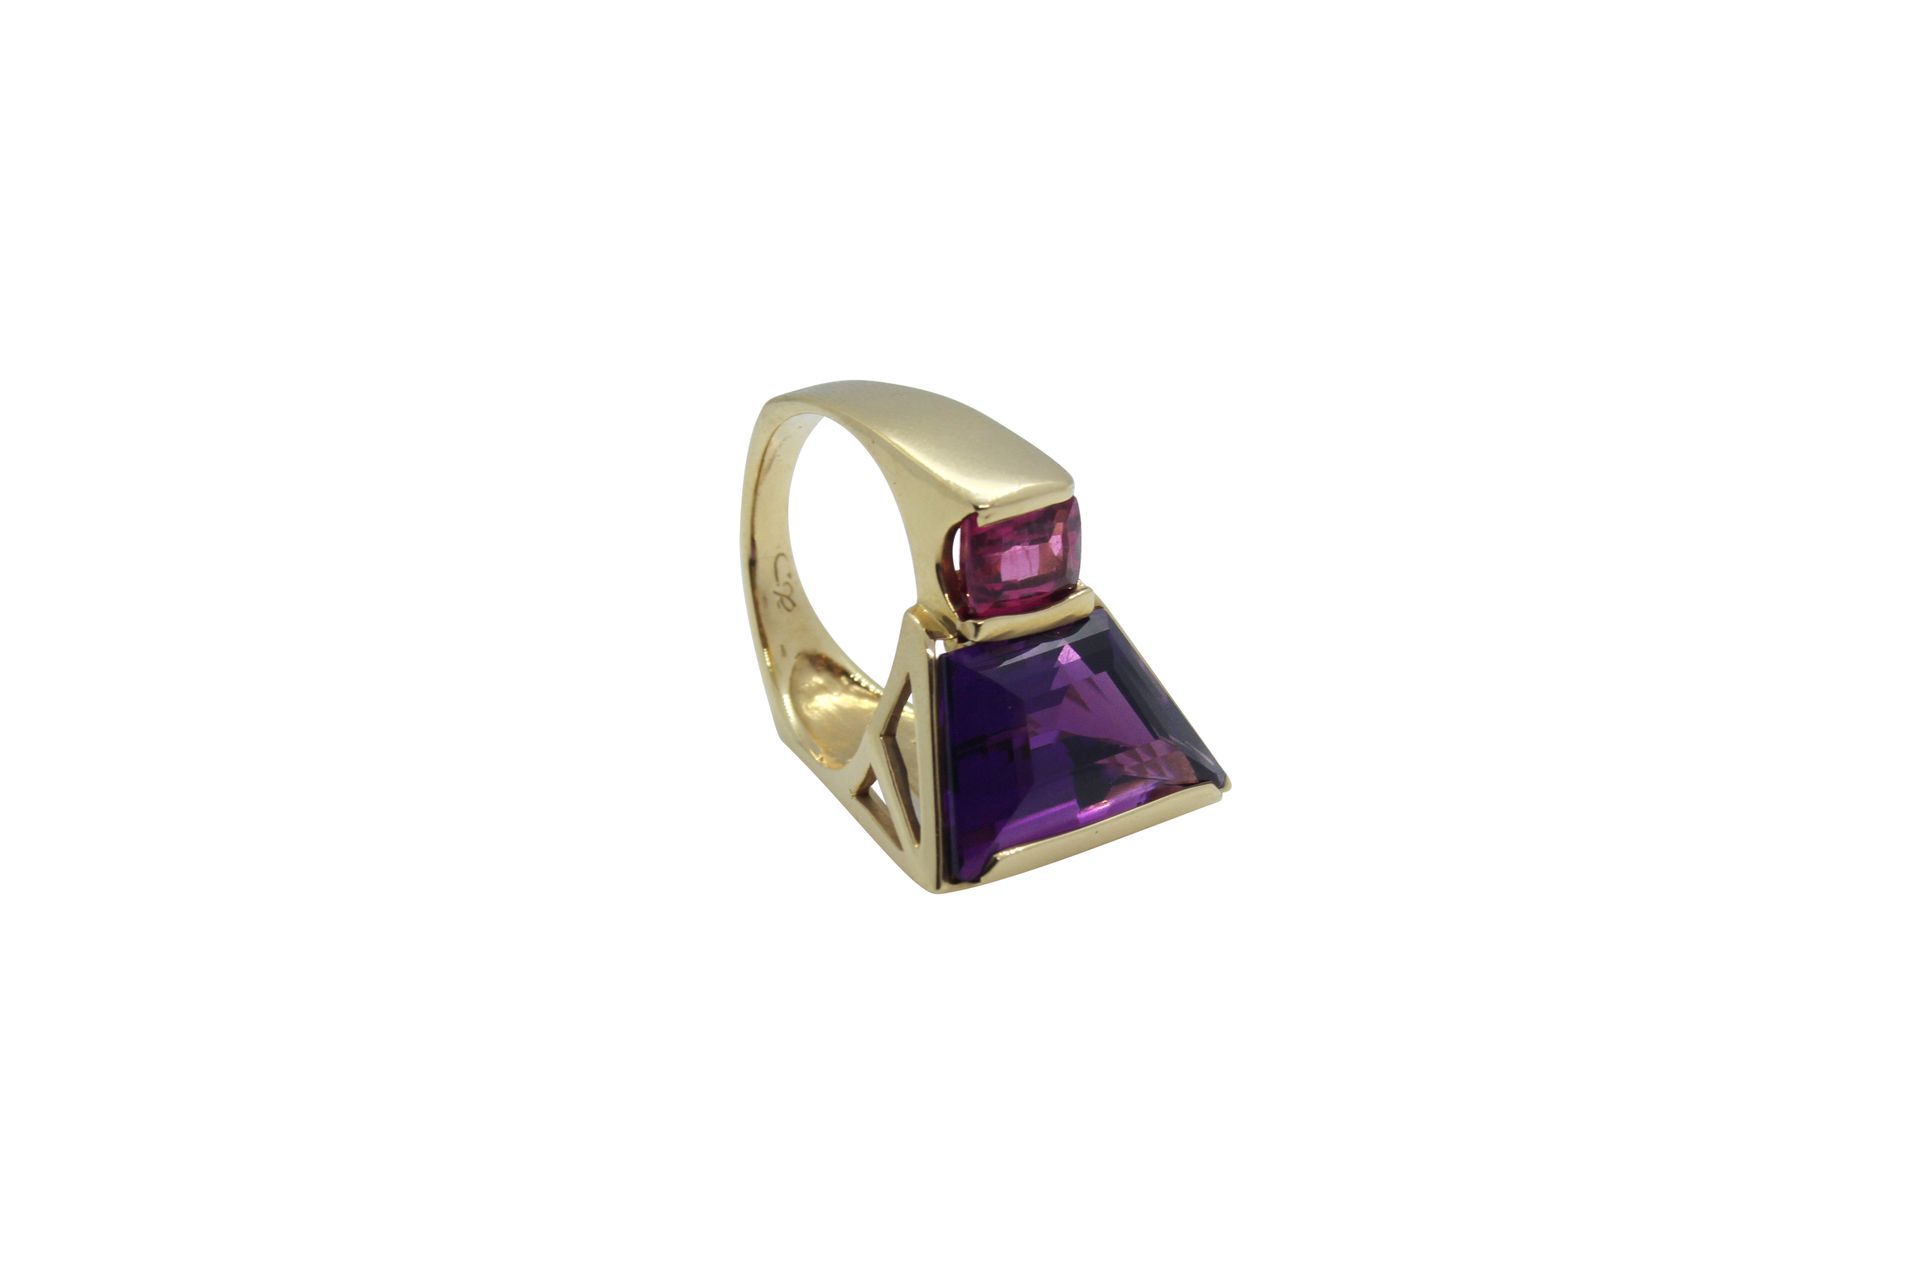 18k gold ring mounted with Tourmaline and Amethyst stones Ring aus 18k Gold mit &hellip;